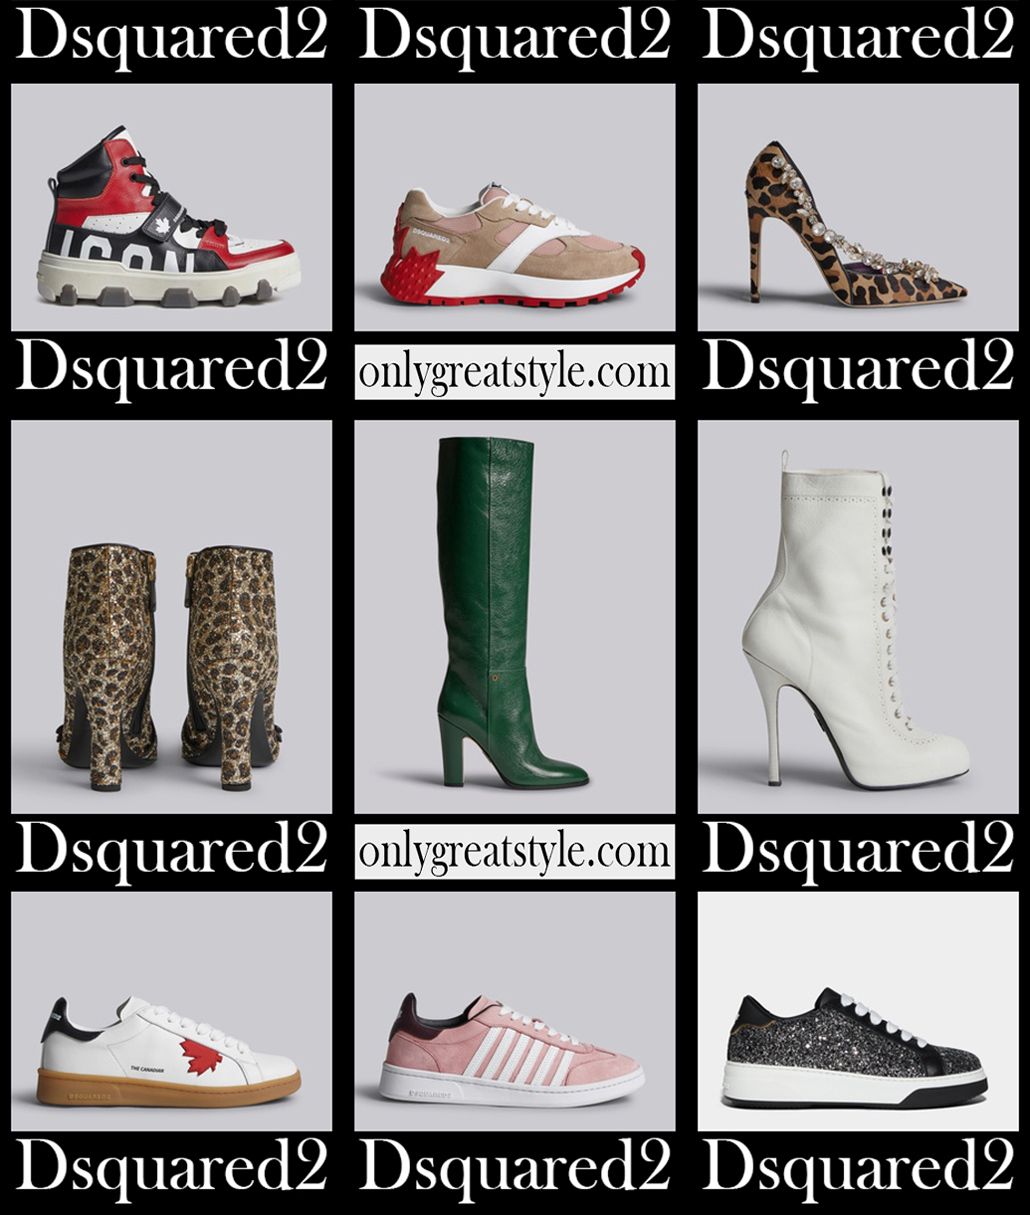 Dsquared2 shoes 2022 new arrivals womens footwear